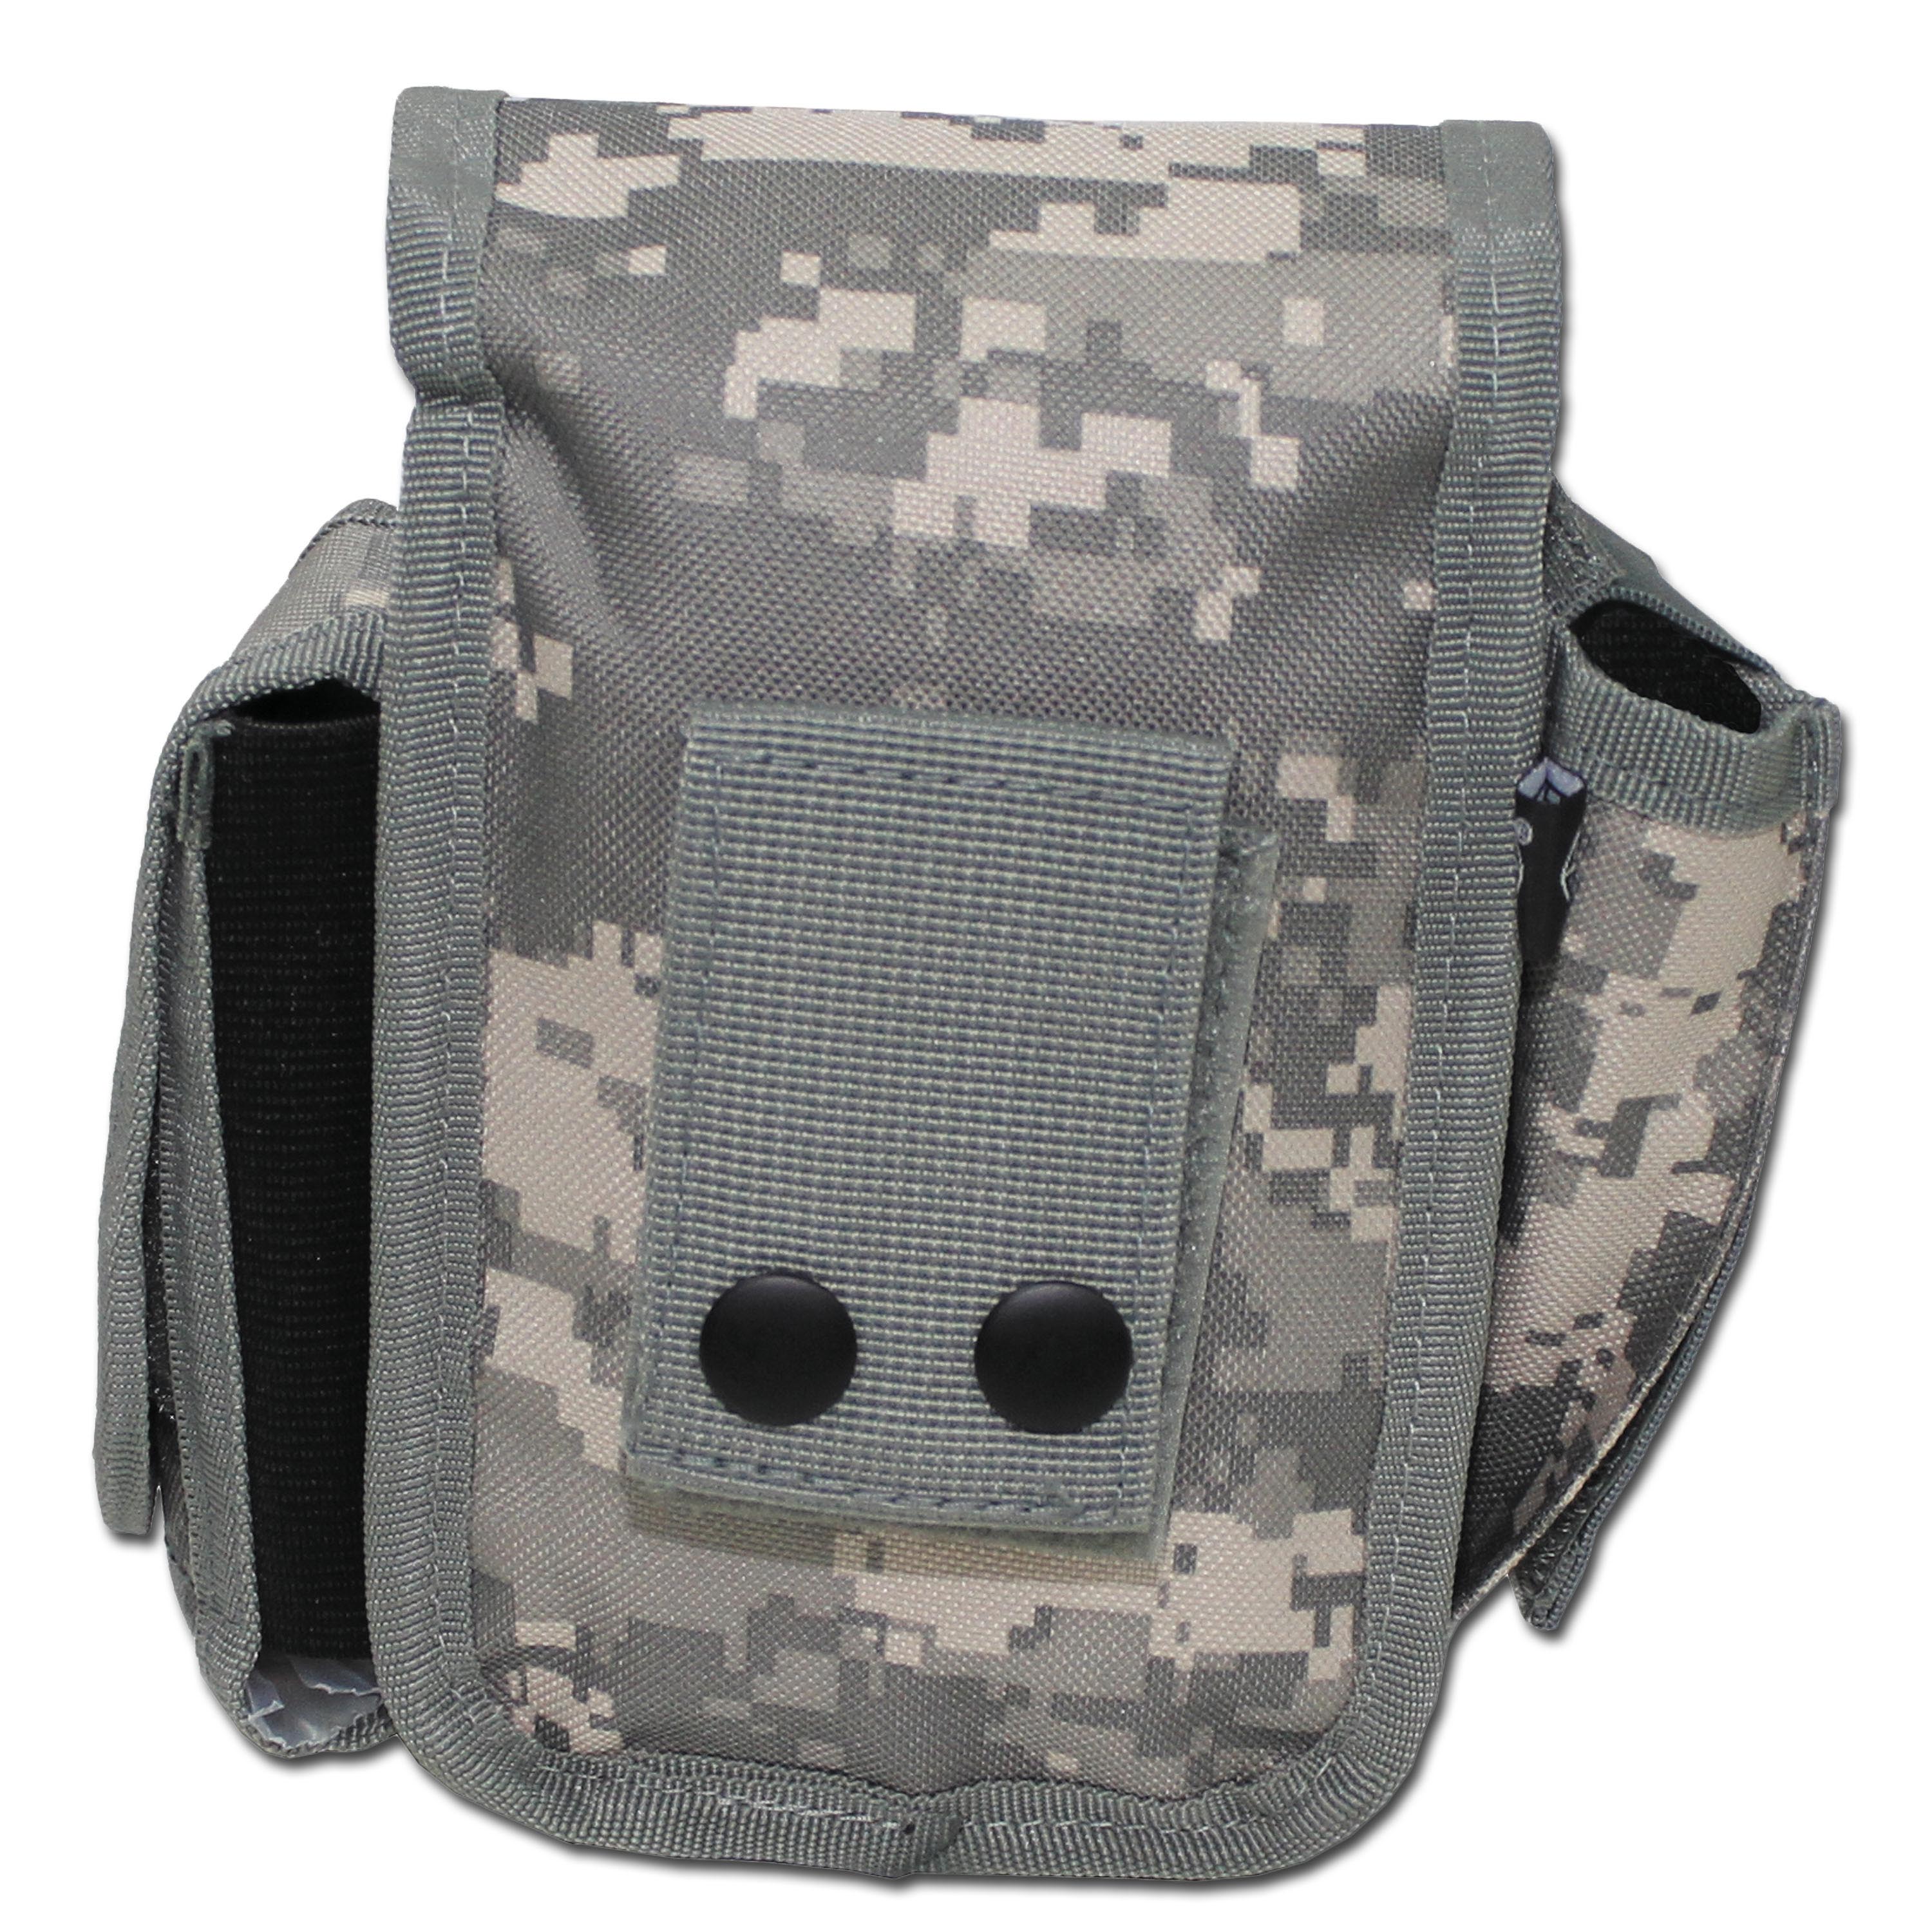 Polybag AT-digital | Polybag AT-digital | Pouches | Pouches | Military ...